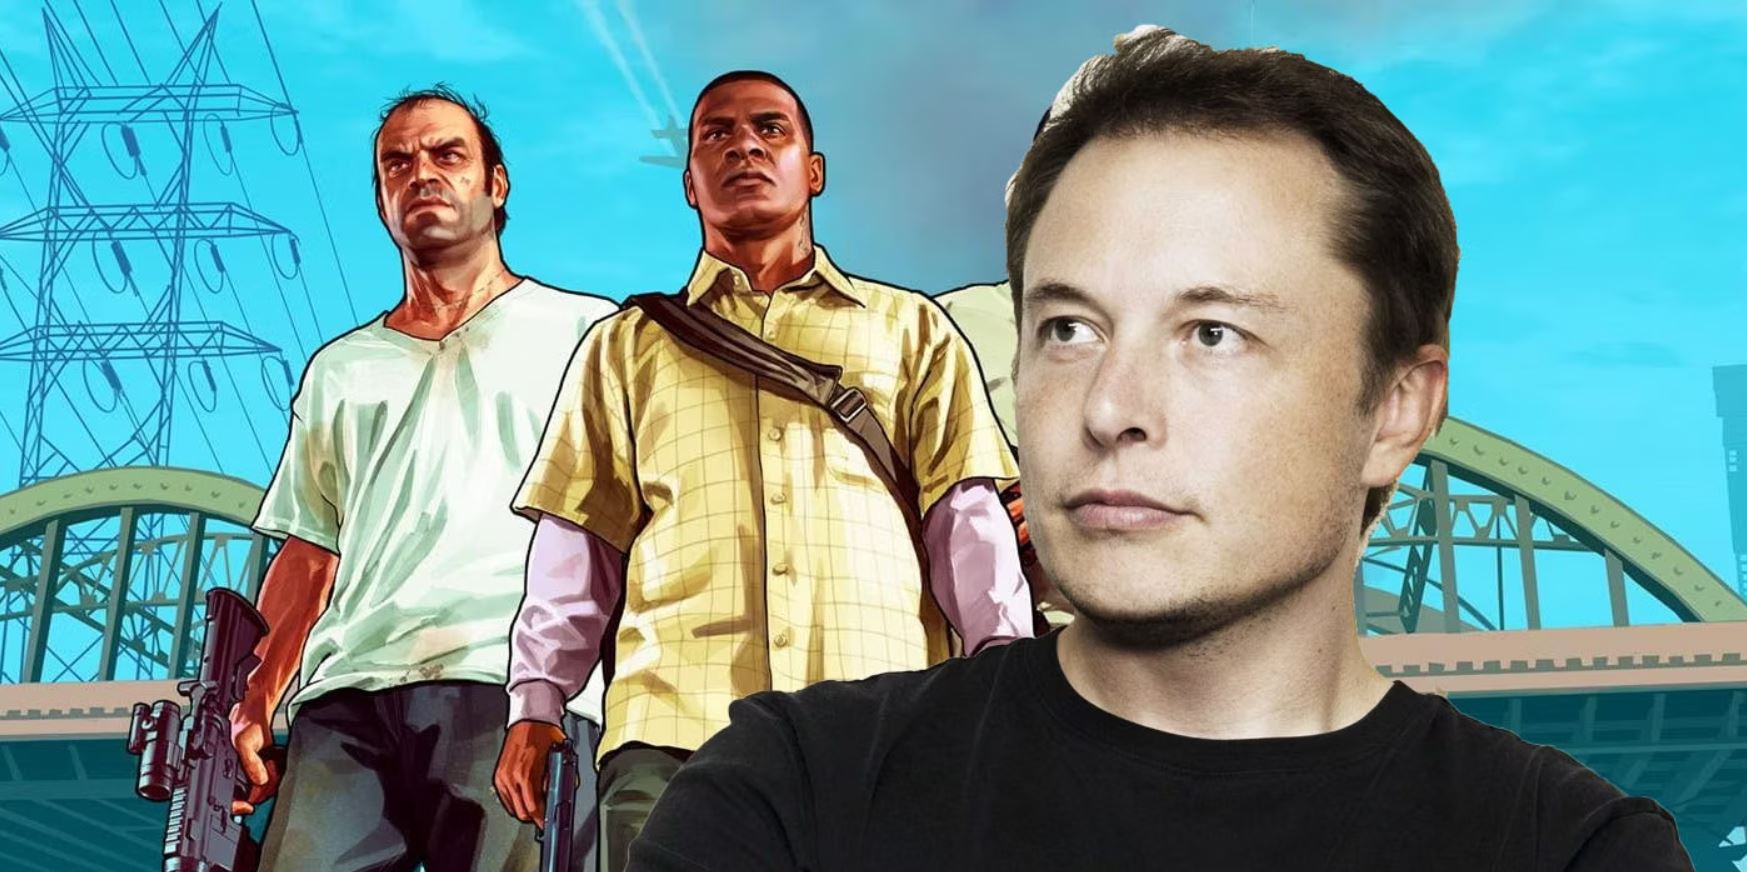 Elon Musk Tried GTA And Look What He Has to Say